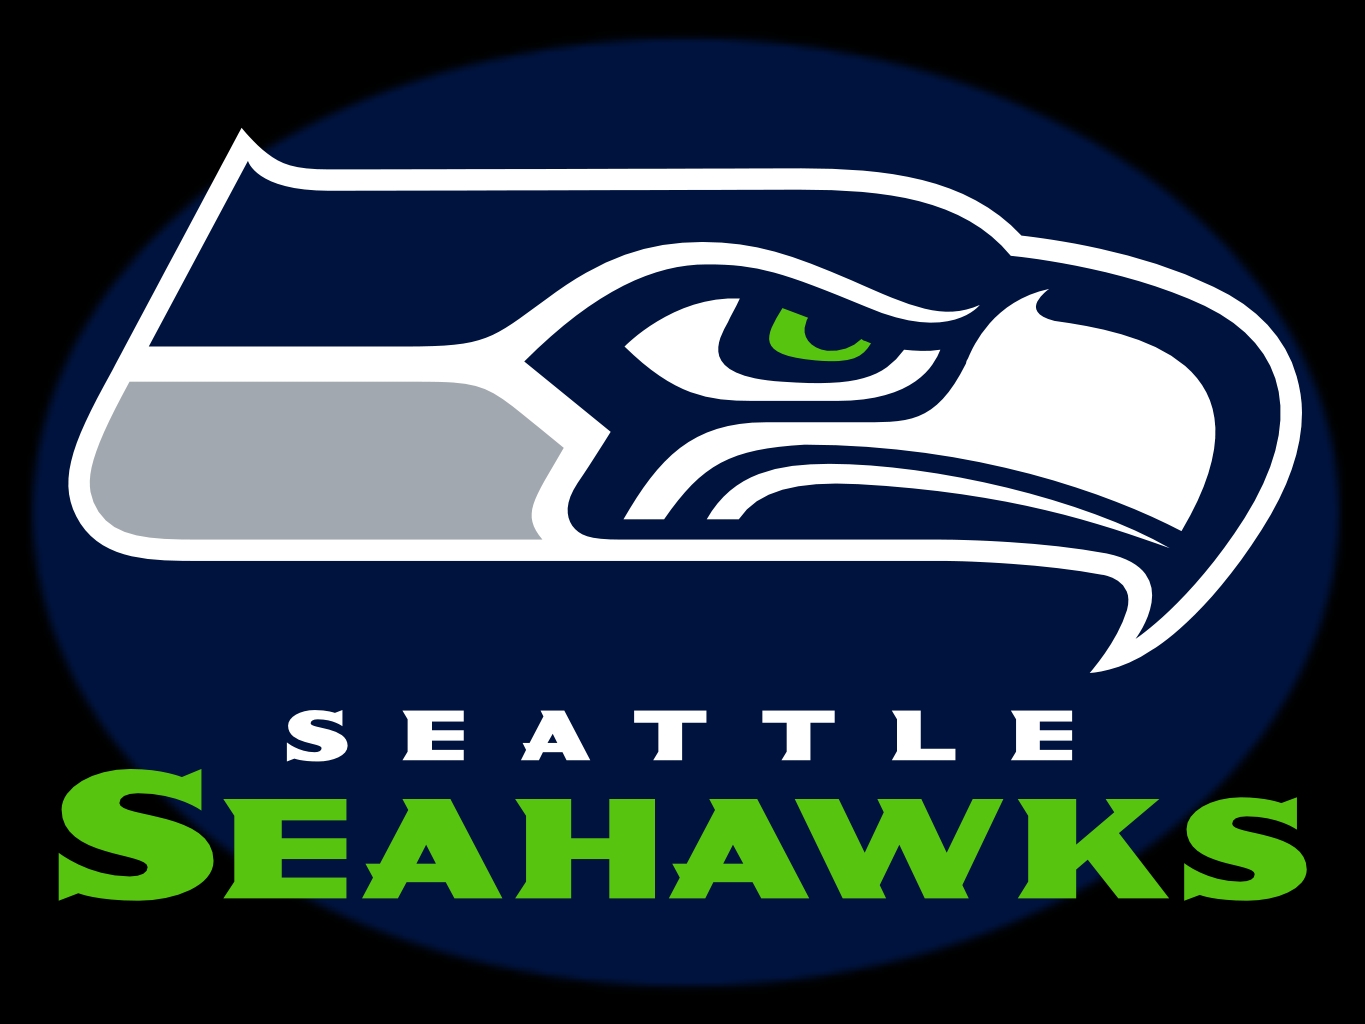 Free Seattle Seahawks, Download Free Seattle Seahawks png images, Free